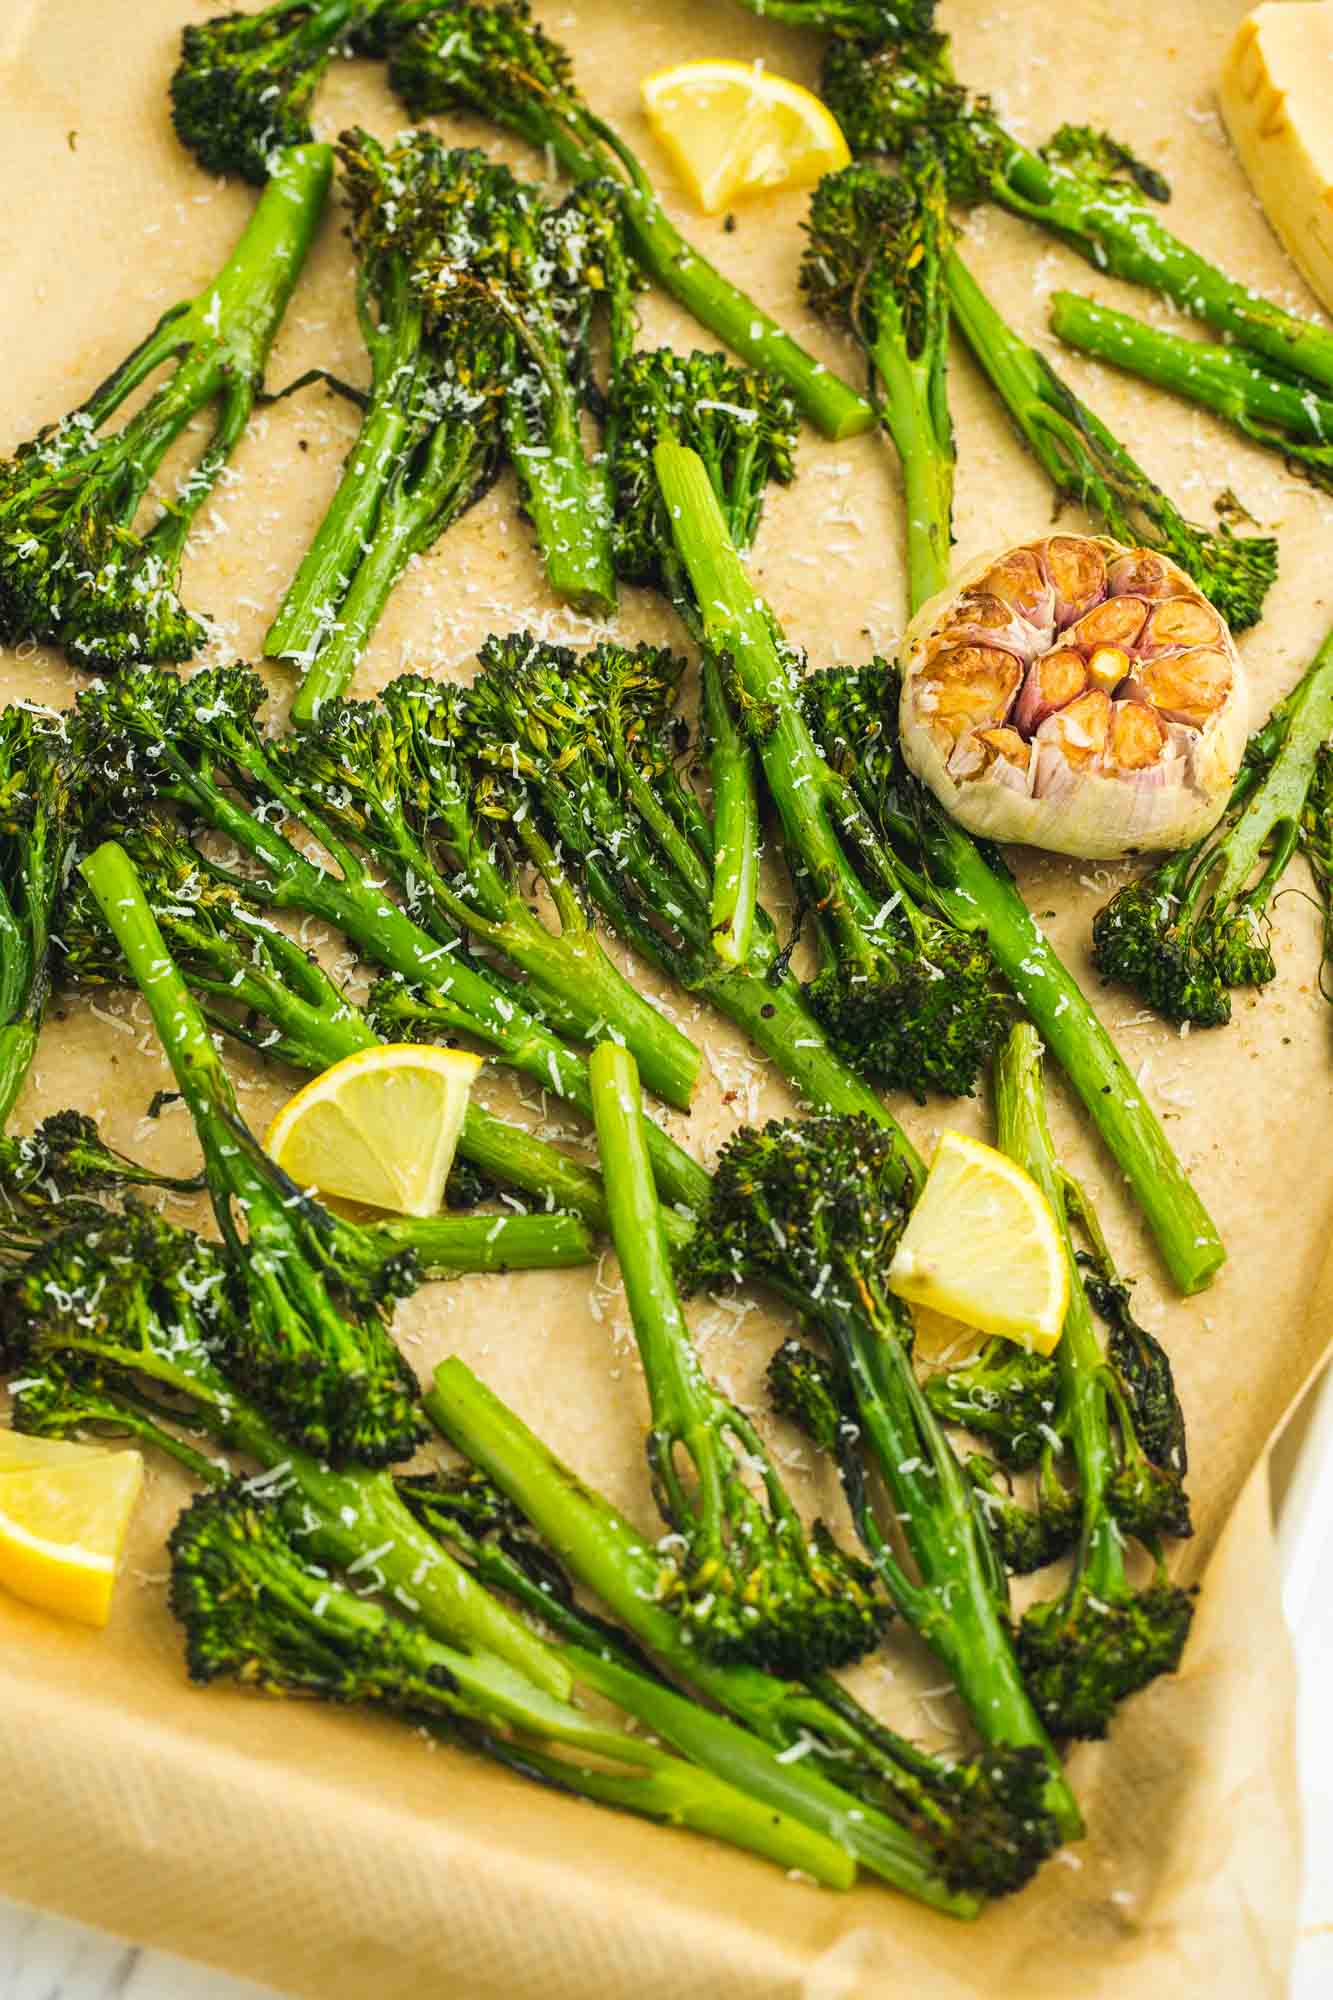 Roasted broccolini and roasted garlic bulb on a sheet pan with lemon slices